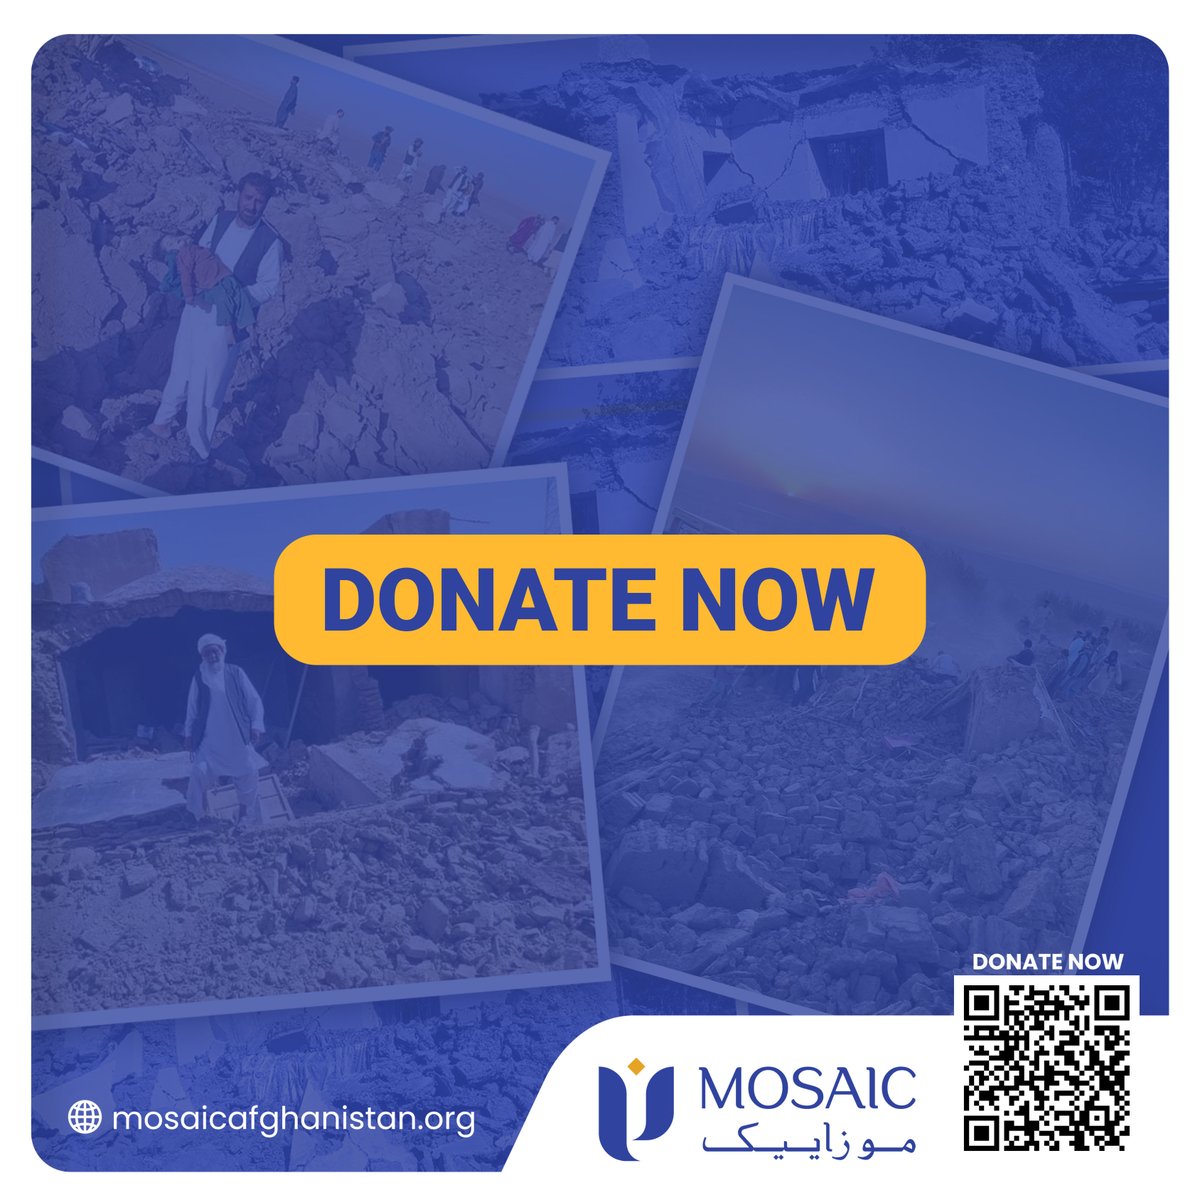 Urgent Appeal: Herat Earthquake Victims Need Your Support!

Donate now
buy.stripe.com/28o15M7G59k65d…

#supportafghanistan
#donatenow #HelpHerat #AfghanistanCrisis #HeratEarthquake
#Afghanistan